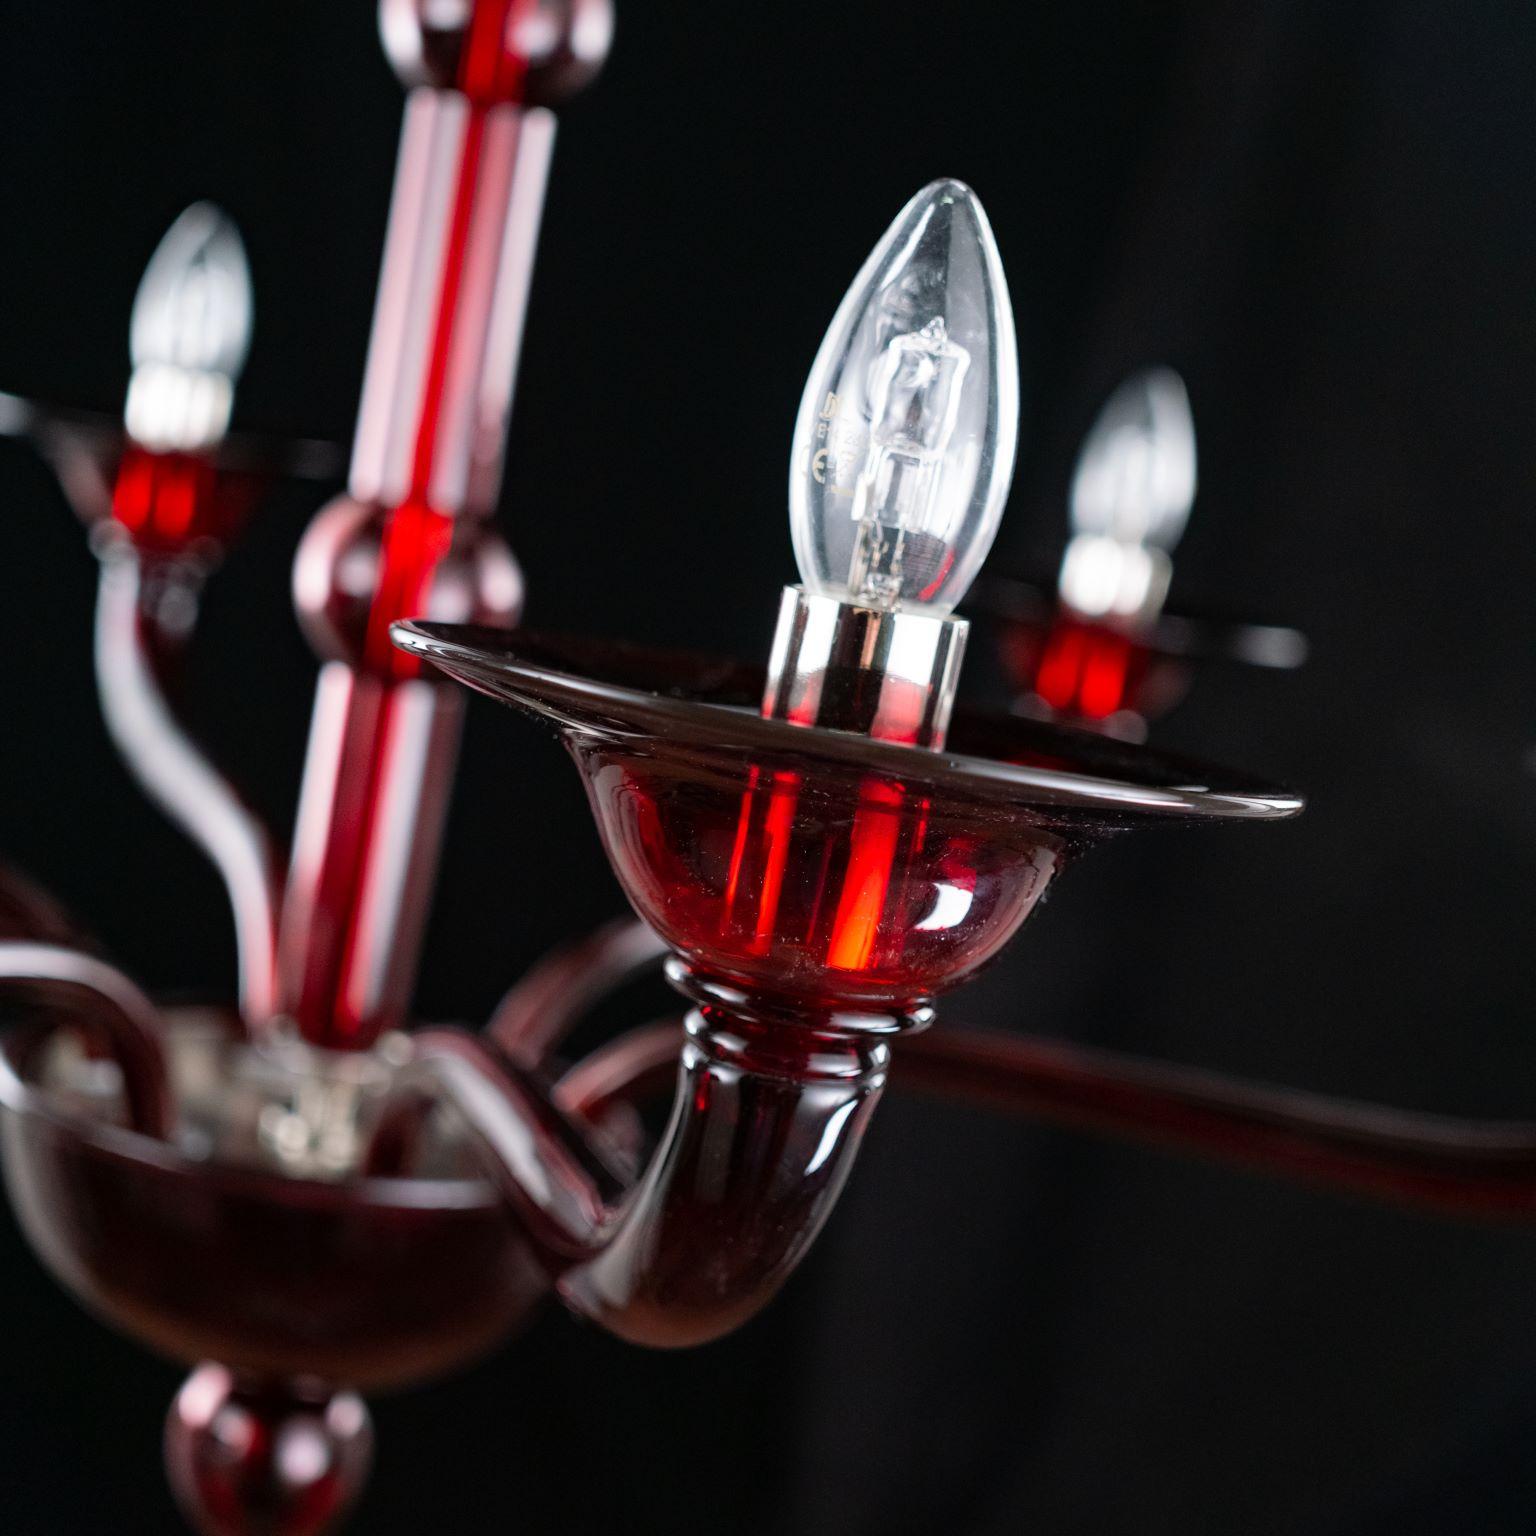 Multiforme Tobia chandelier 6 lights. red Murano glass with castle arms climbing arms.
The blown glass chandelier Tobia harks back to the design typical of the first half of the 20th century.
This lighting work is characterized by a tube-shaped